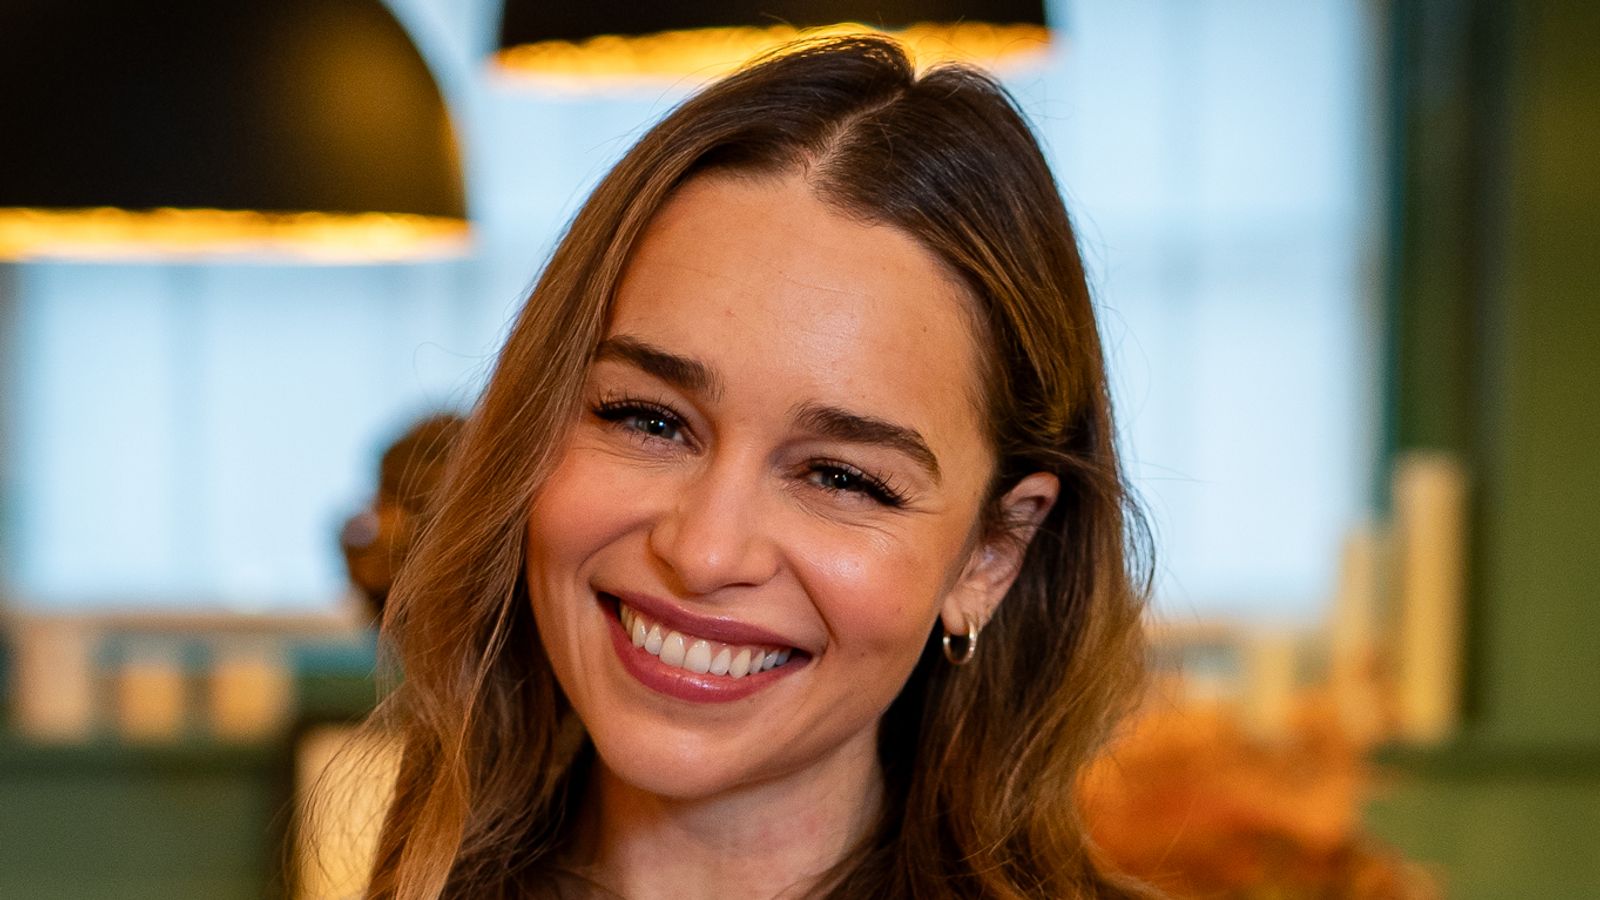 Emilia Clarke feared she would be fired from Game Of Thrones after brain injury